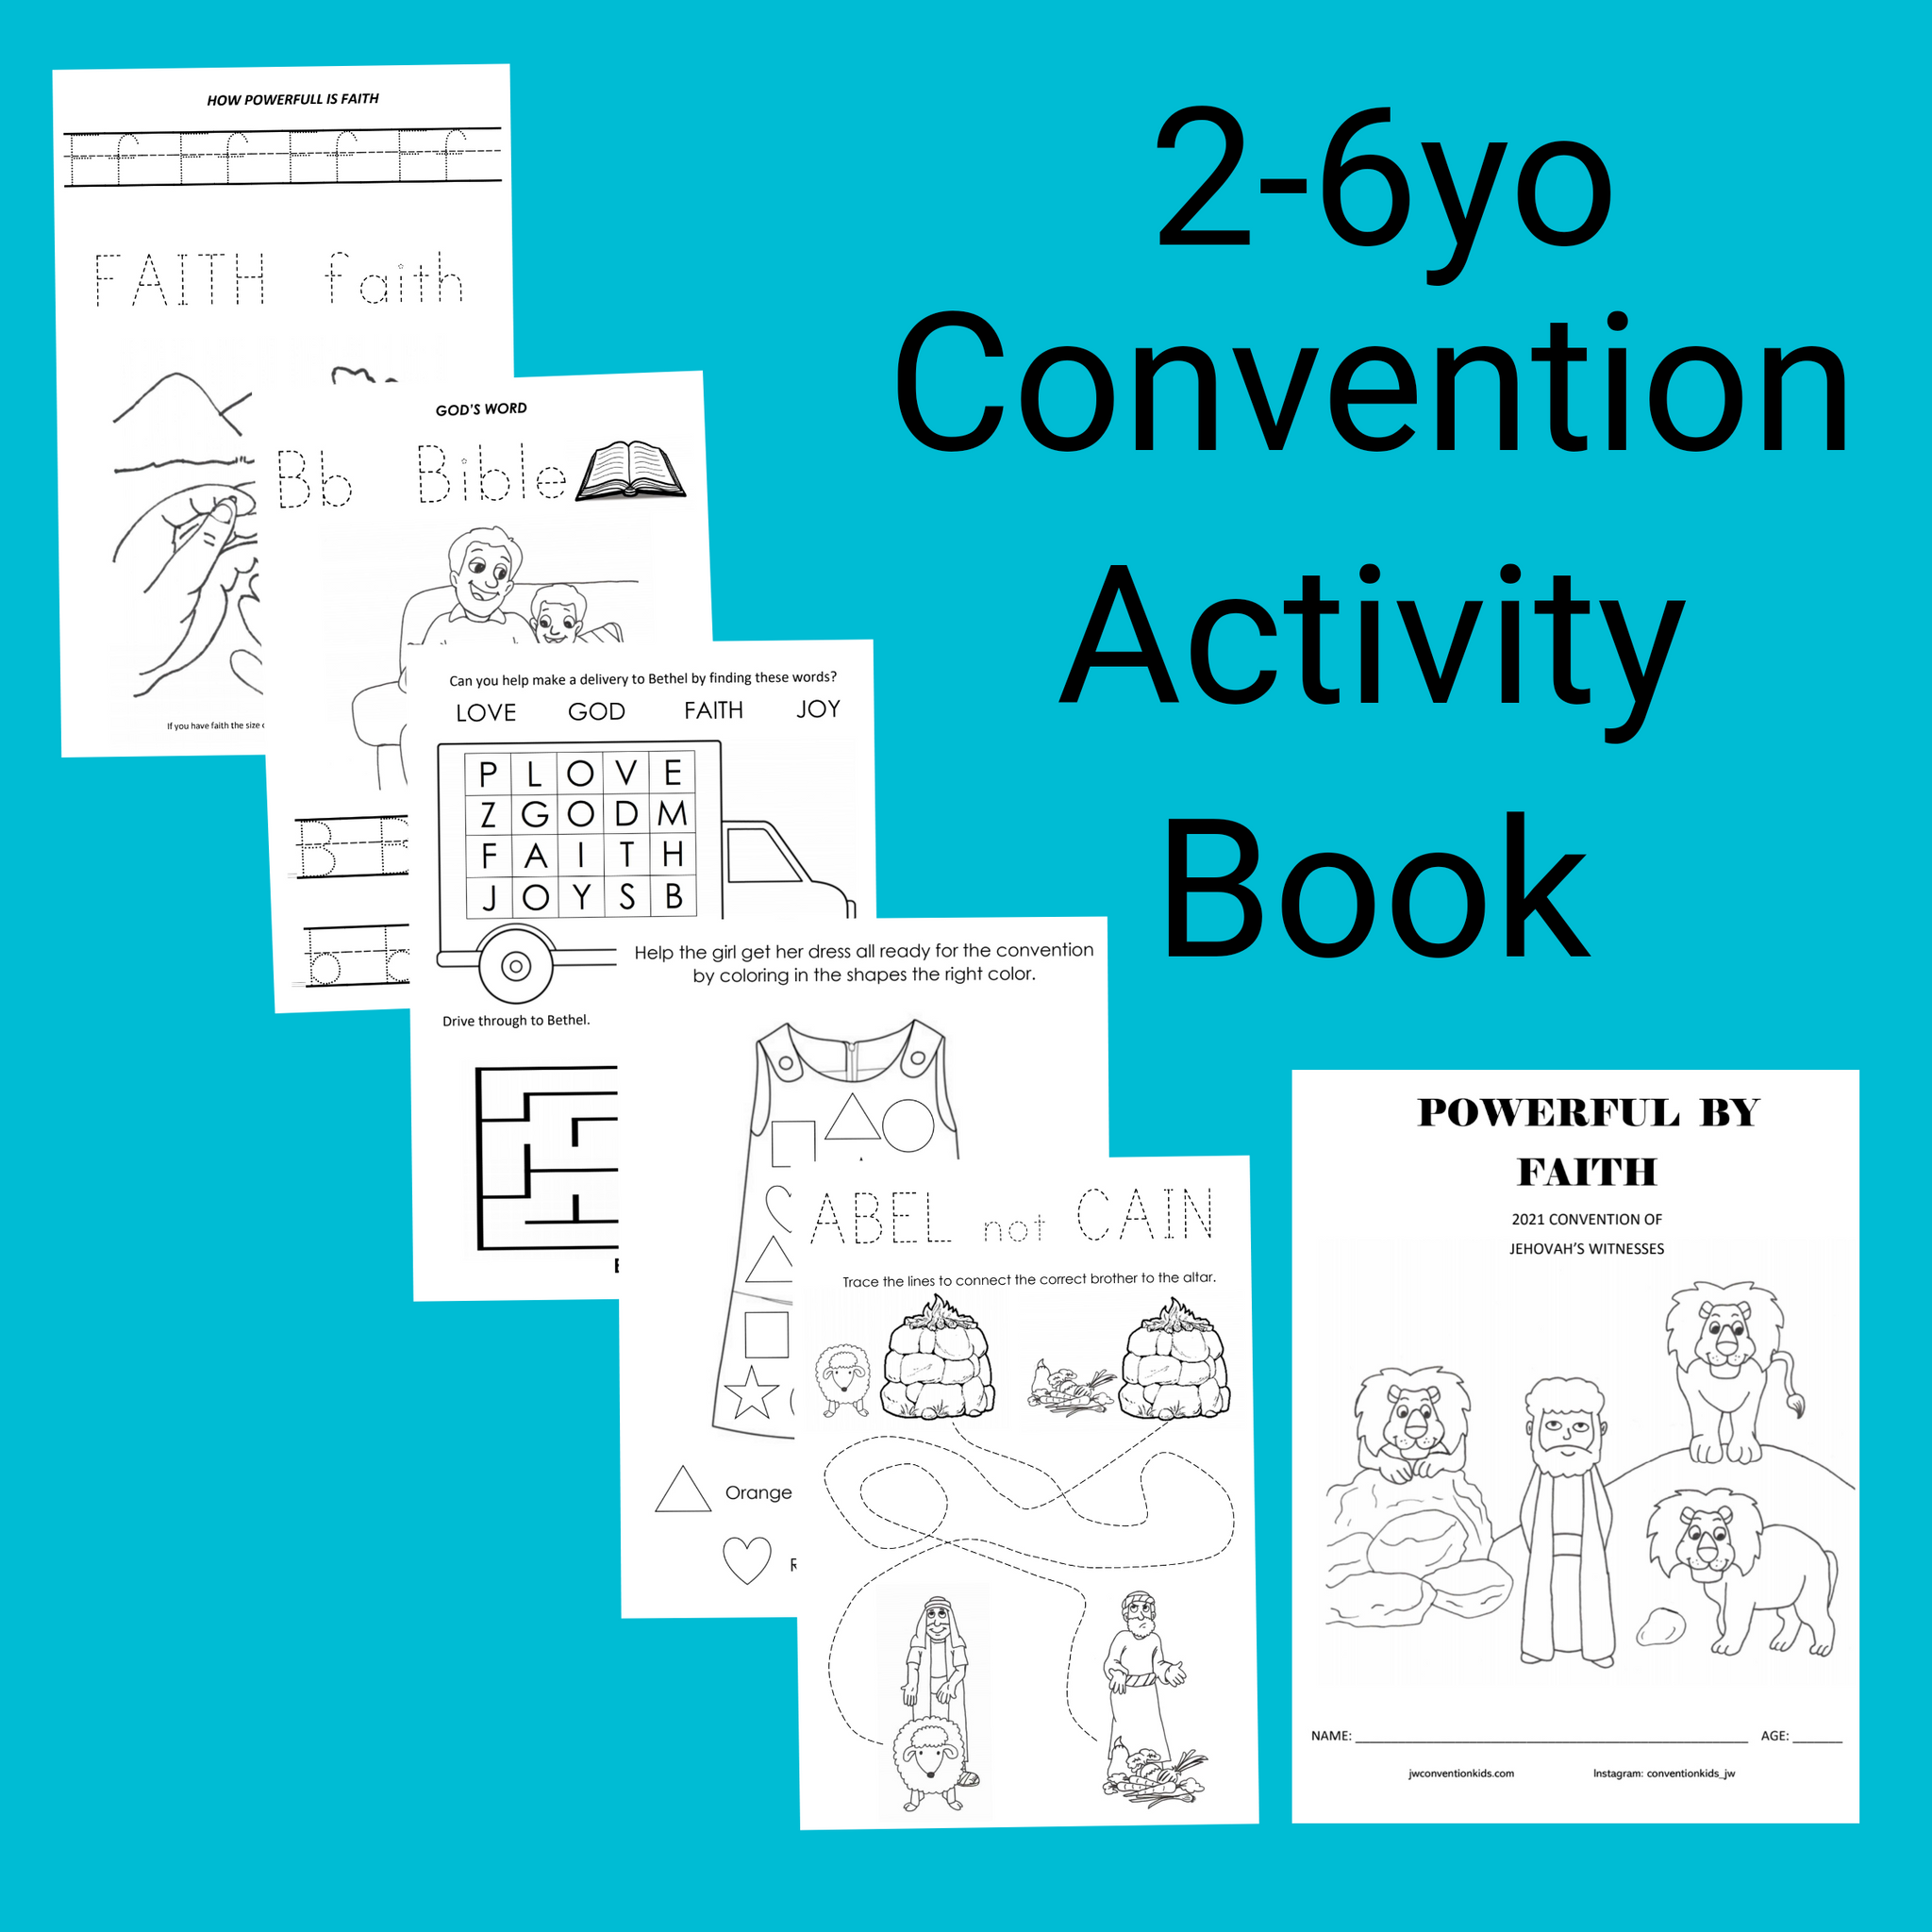 Download 2 6yo Powerful By Faith Convention Activity Book Pdf Convention Kids